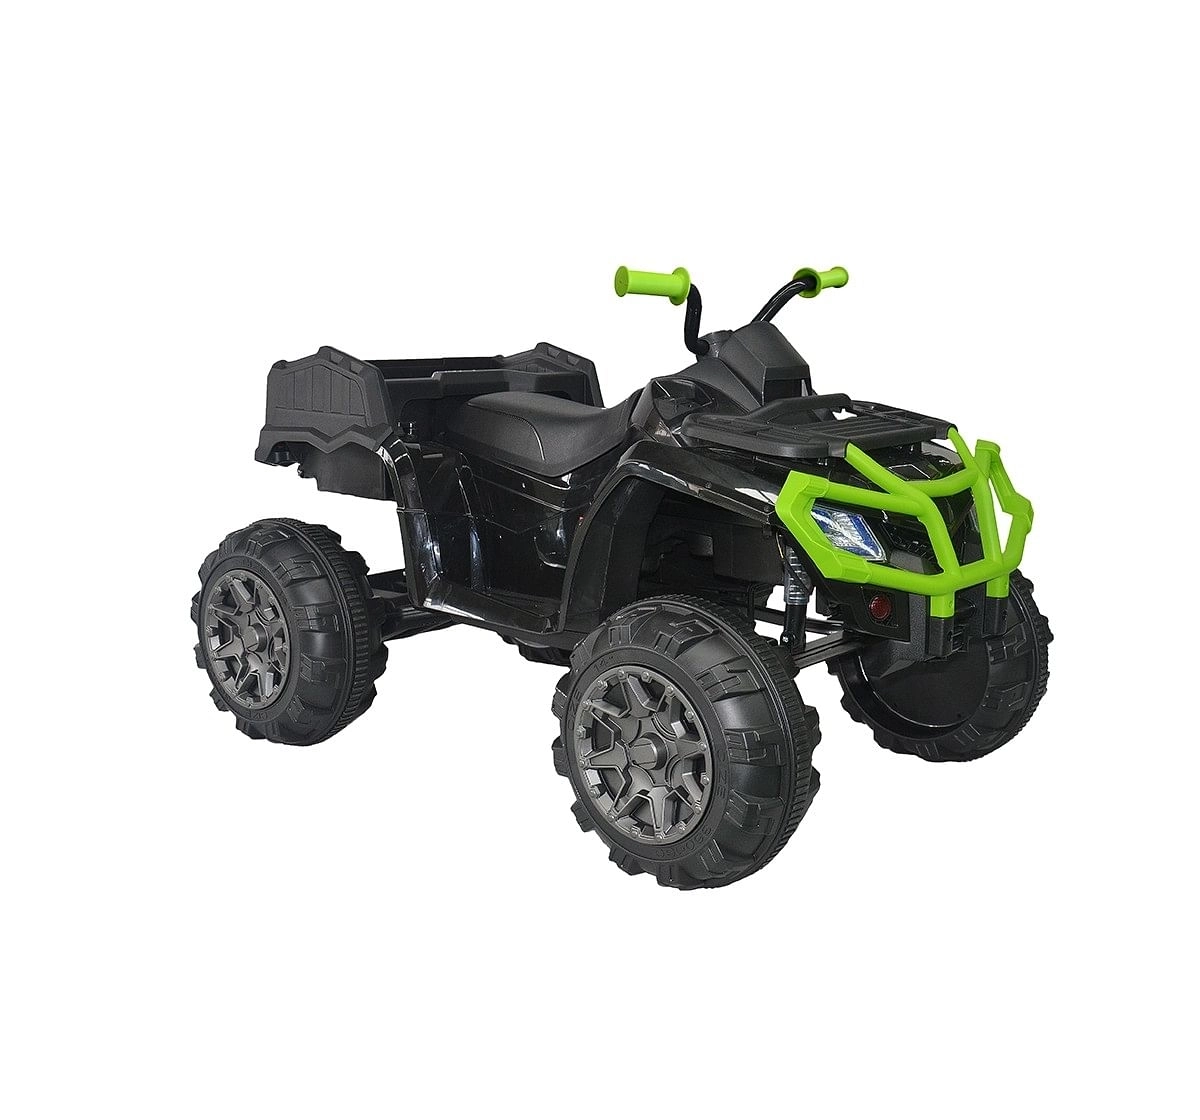 Bettyma Atv Rc Buggy 2.5Ghz - Black Battery Operated Rideons for Kids age 3Y+ (Black)